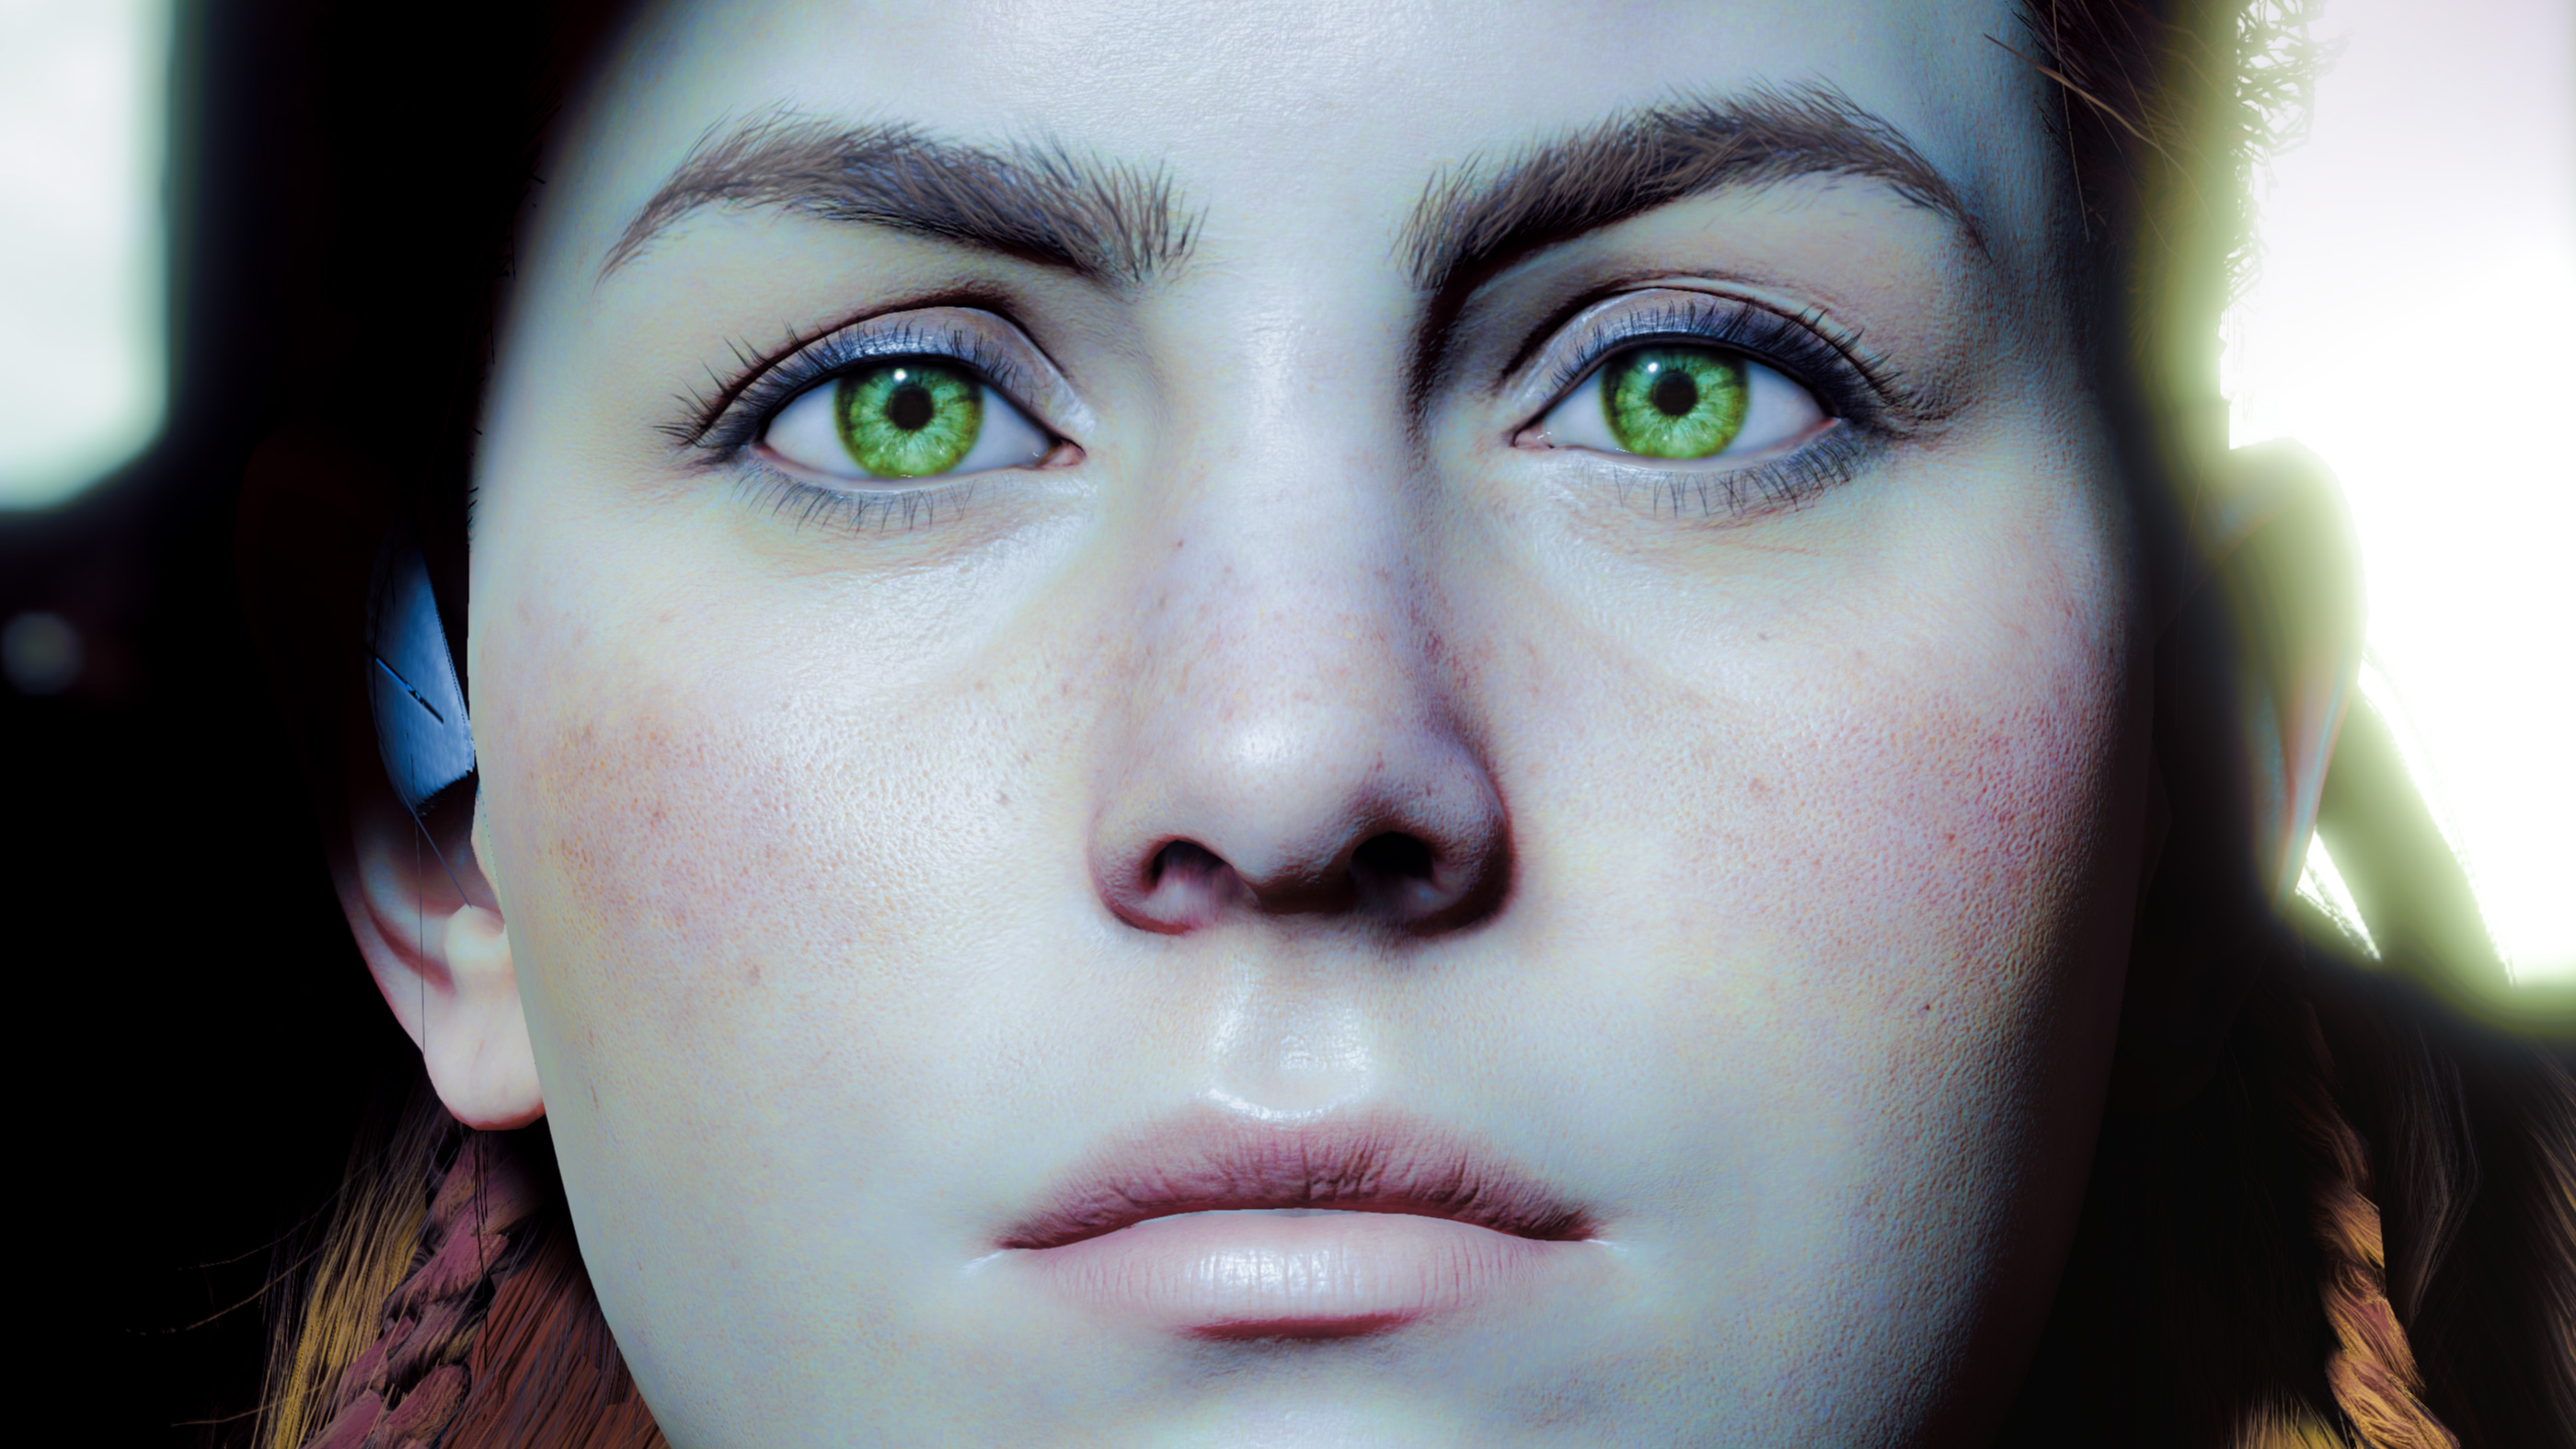 The face of a woman with bright green eyes